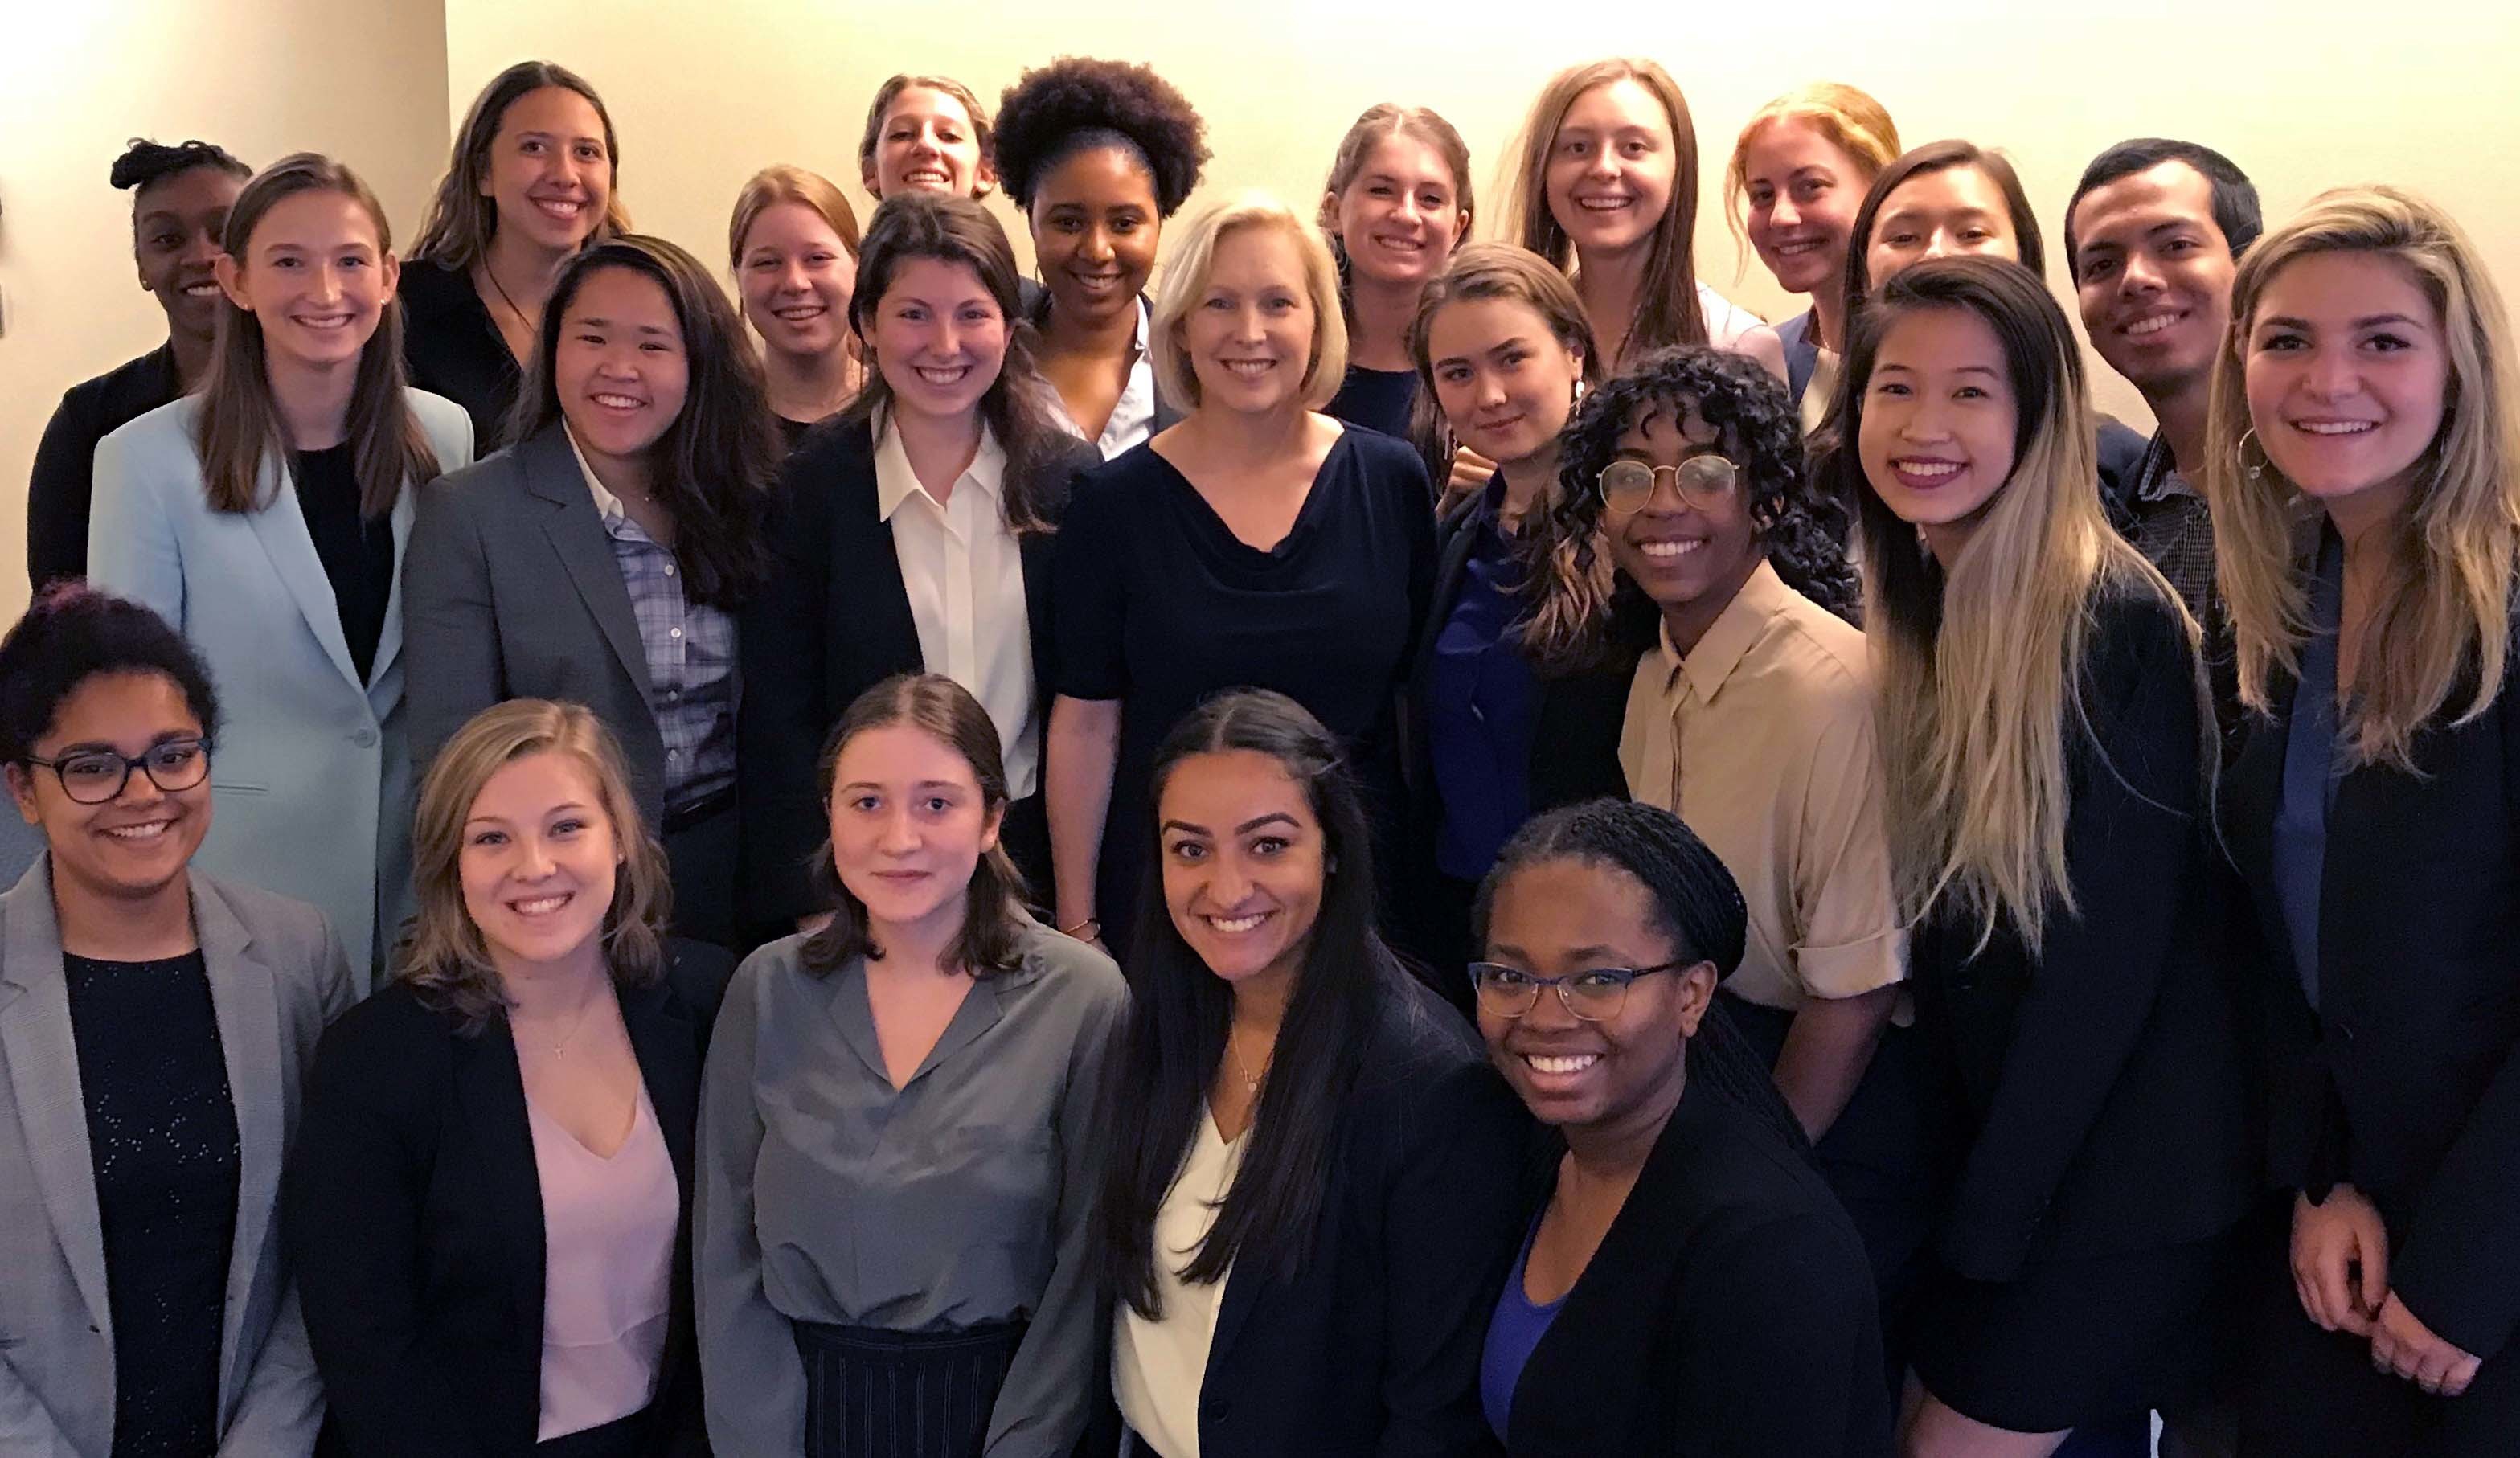 2018 interns with Senator Gillibrand, including Posse Scholars Jacqueline Grogan (middle row, second from left), Yazmin Baptiste (middle row, third from right) and Leo Loyola (top row, right corner).